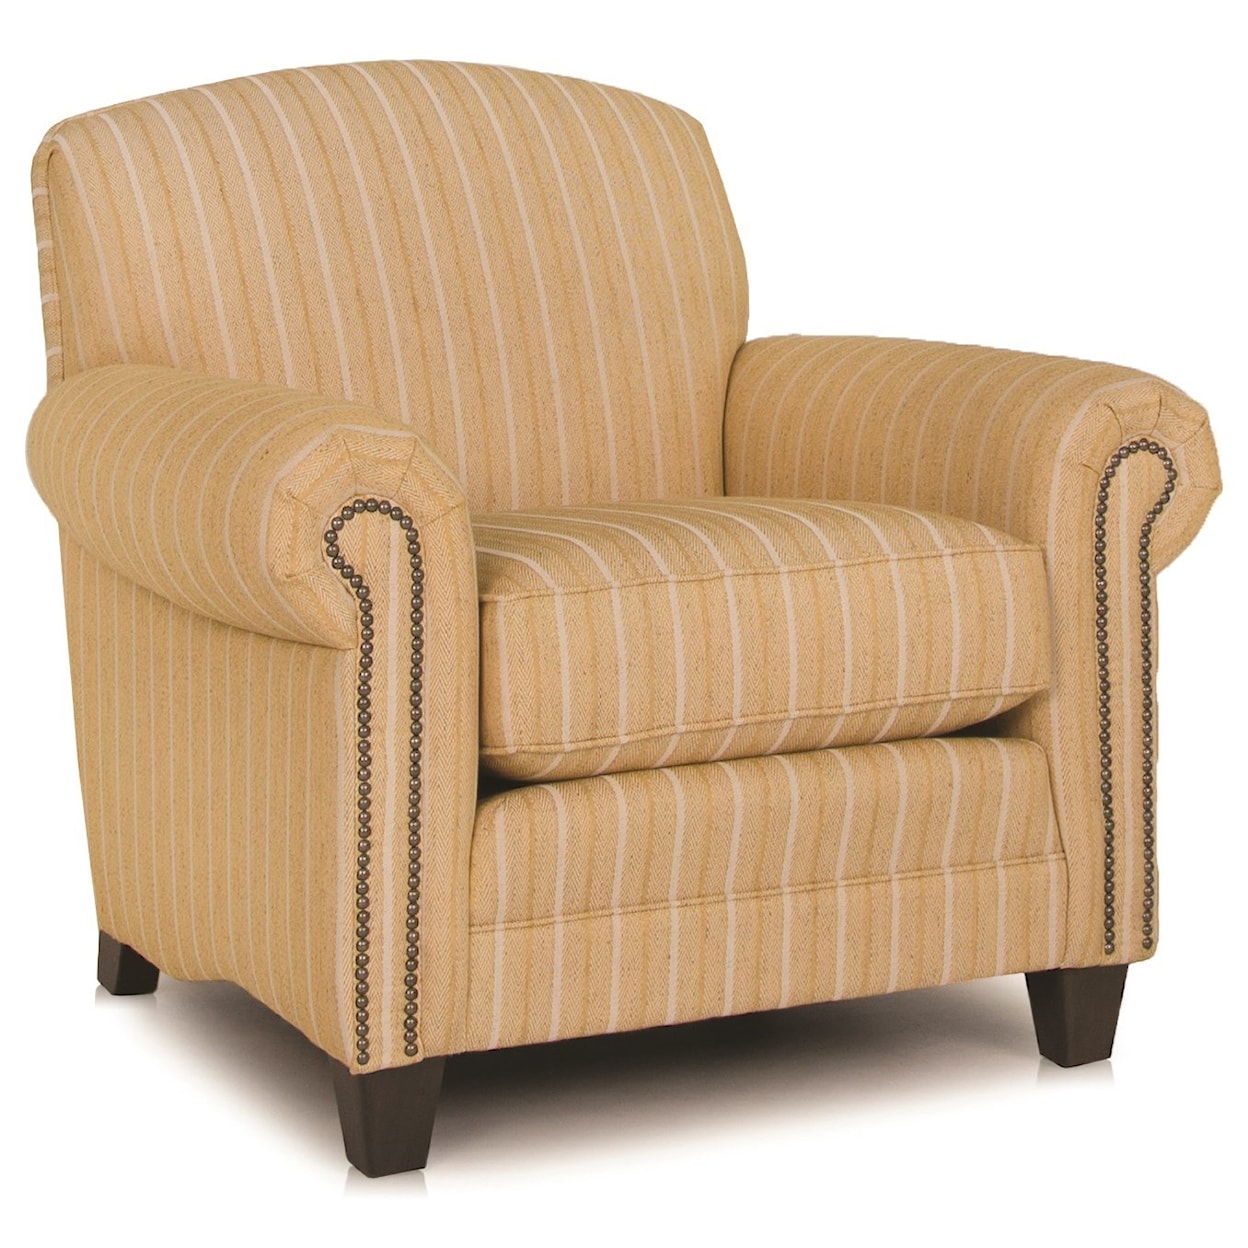 Smith Brothers 397 Upholstered Chair